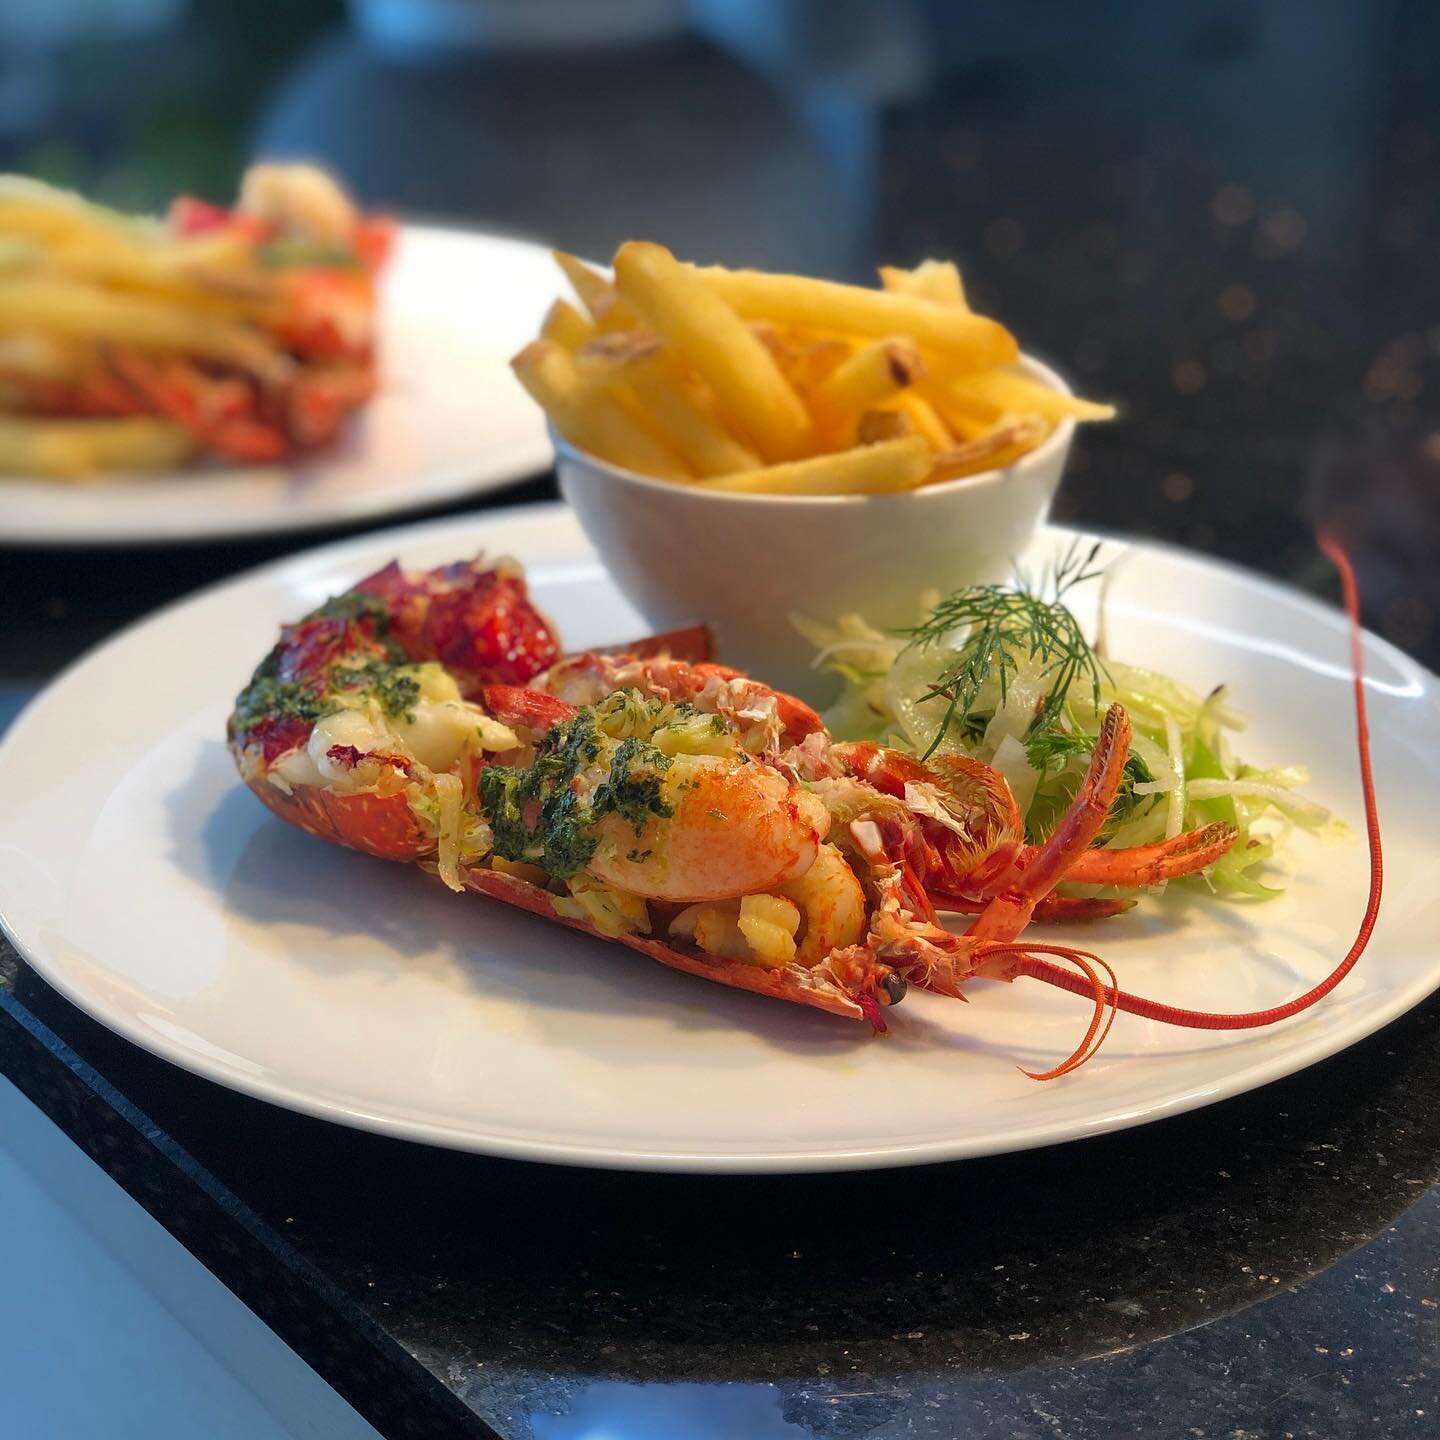 If it isn&rsquo;t broken don&rsquo;t try to fix it! Sometimes the classics are best kept simple! We were lucky enough to be completing another tasting this week with some great British seafood on show! #Classic #lobster #frites